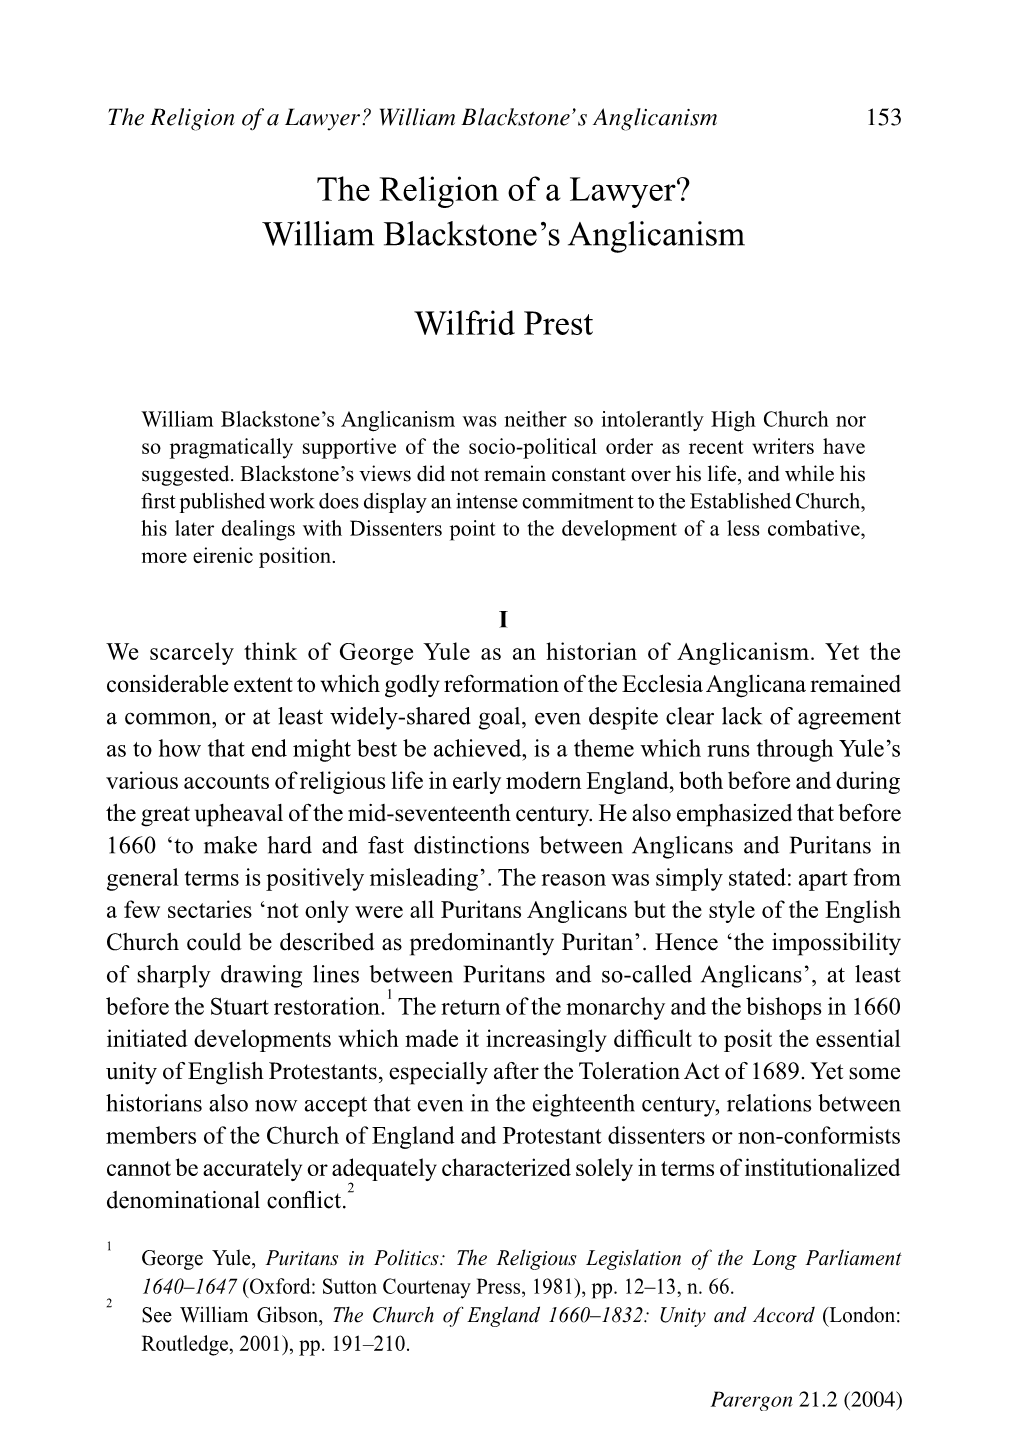 The Religion of a Lawyer? William Blackstone's Anglicanism Wilfrid Prest